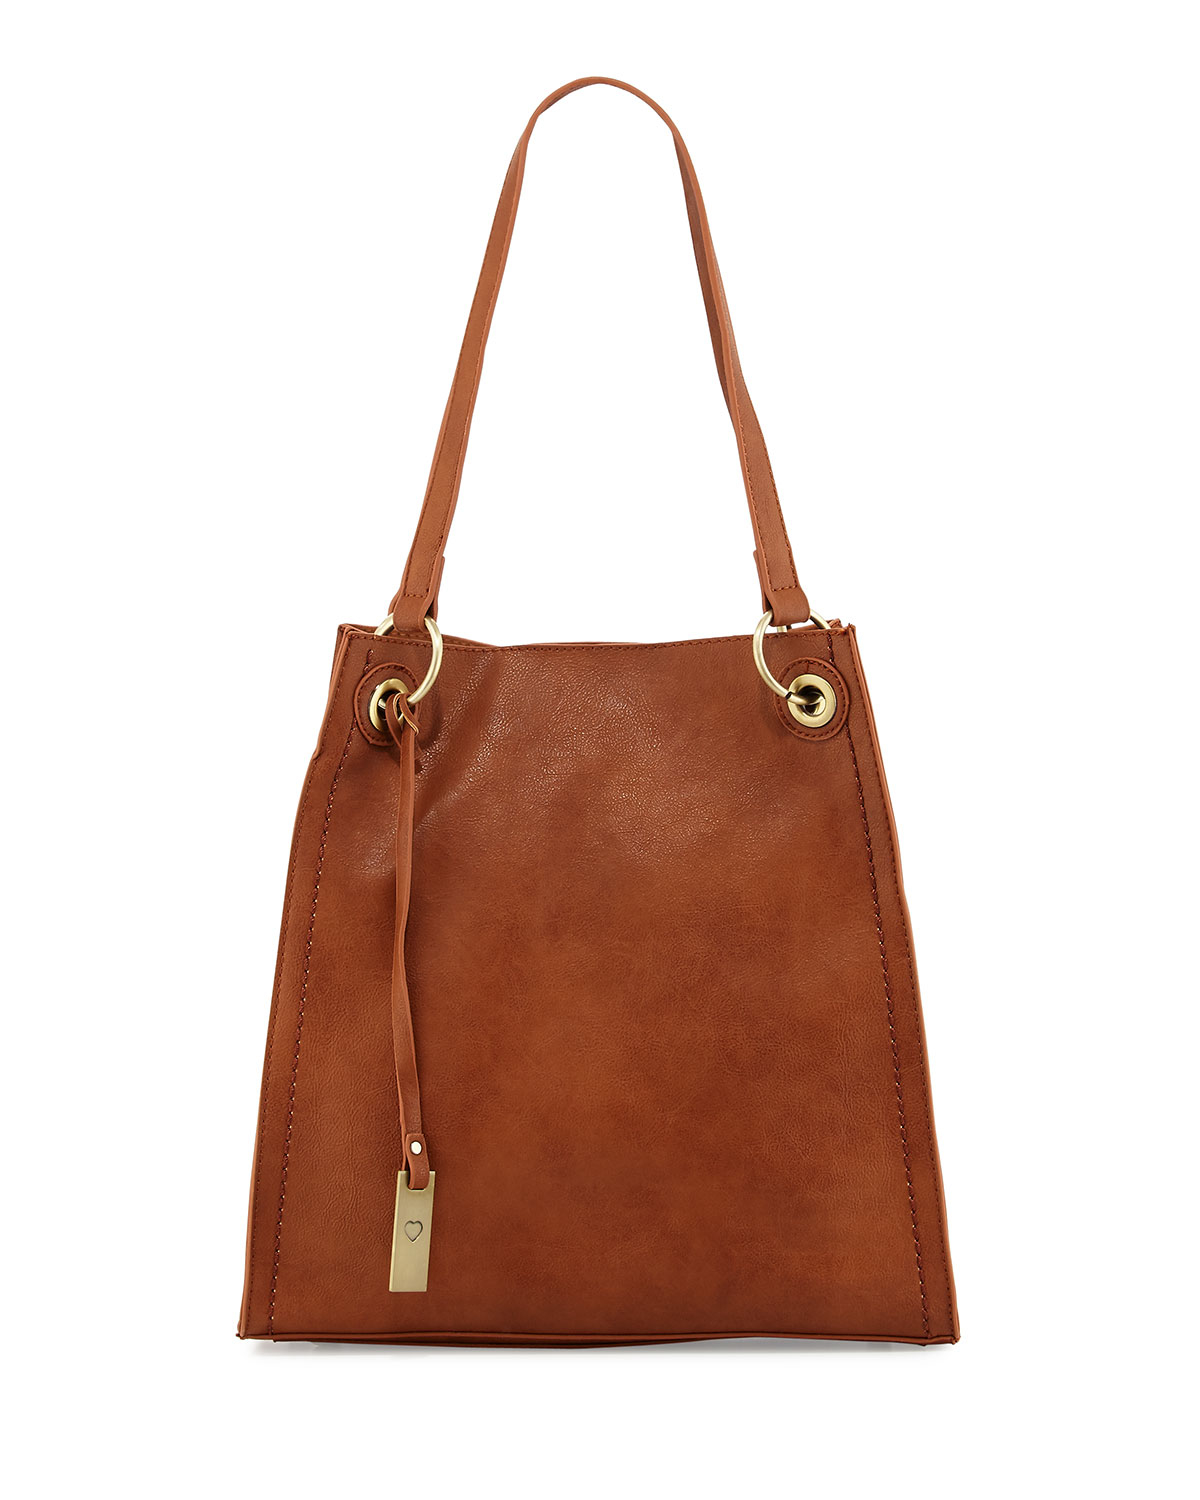 Lyst - Urban Originals Montana Faux-leather Tote Bag in Brown